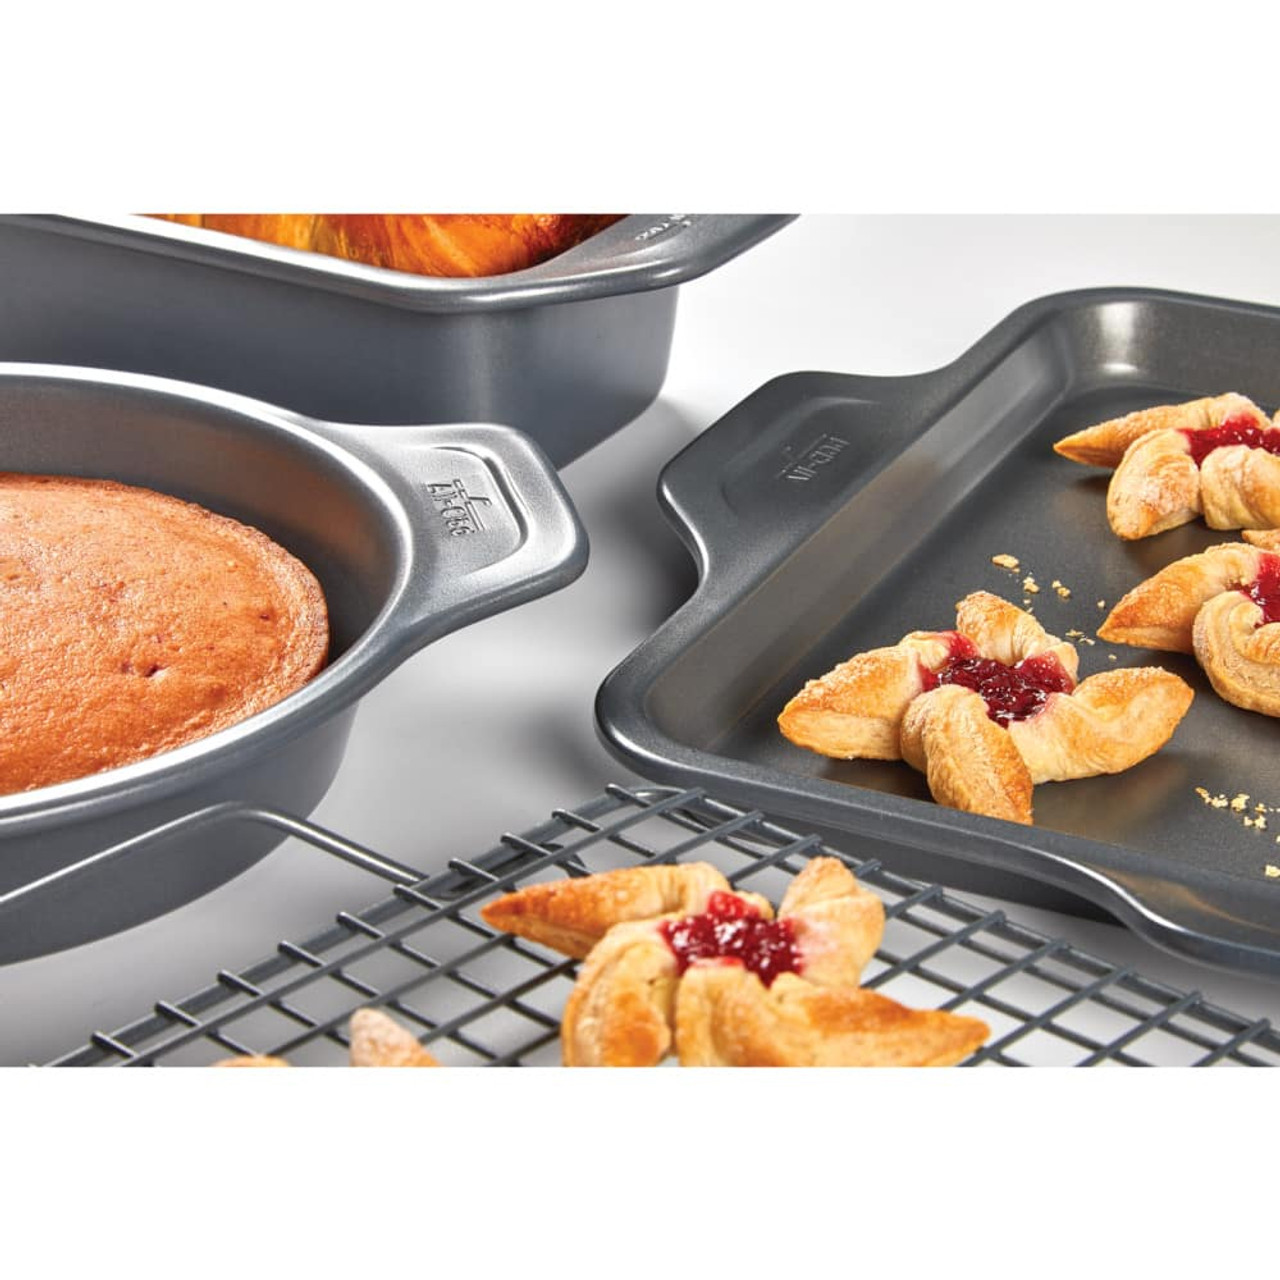 https://cdn11.bigcommerce.com/s-hccytny0od/images/stencil/1280x1280/products/3291/11781/all-clad-pro-release-10pc-bakeware-set-2__90817.1594229695.jpg?c=2?imbypass=on